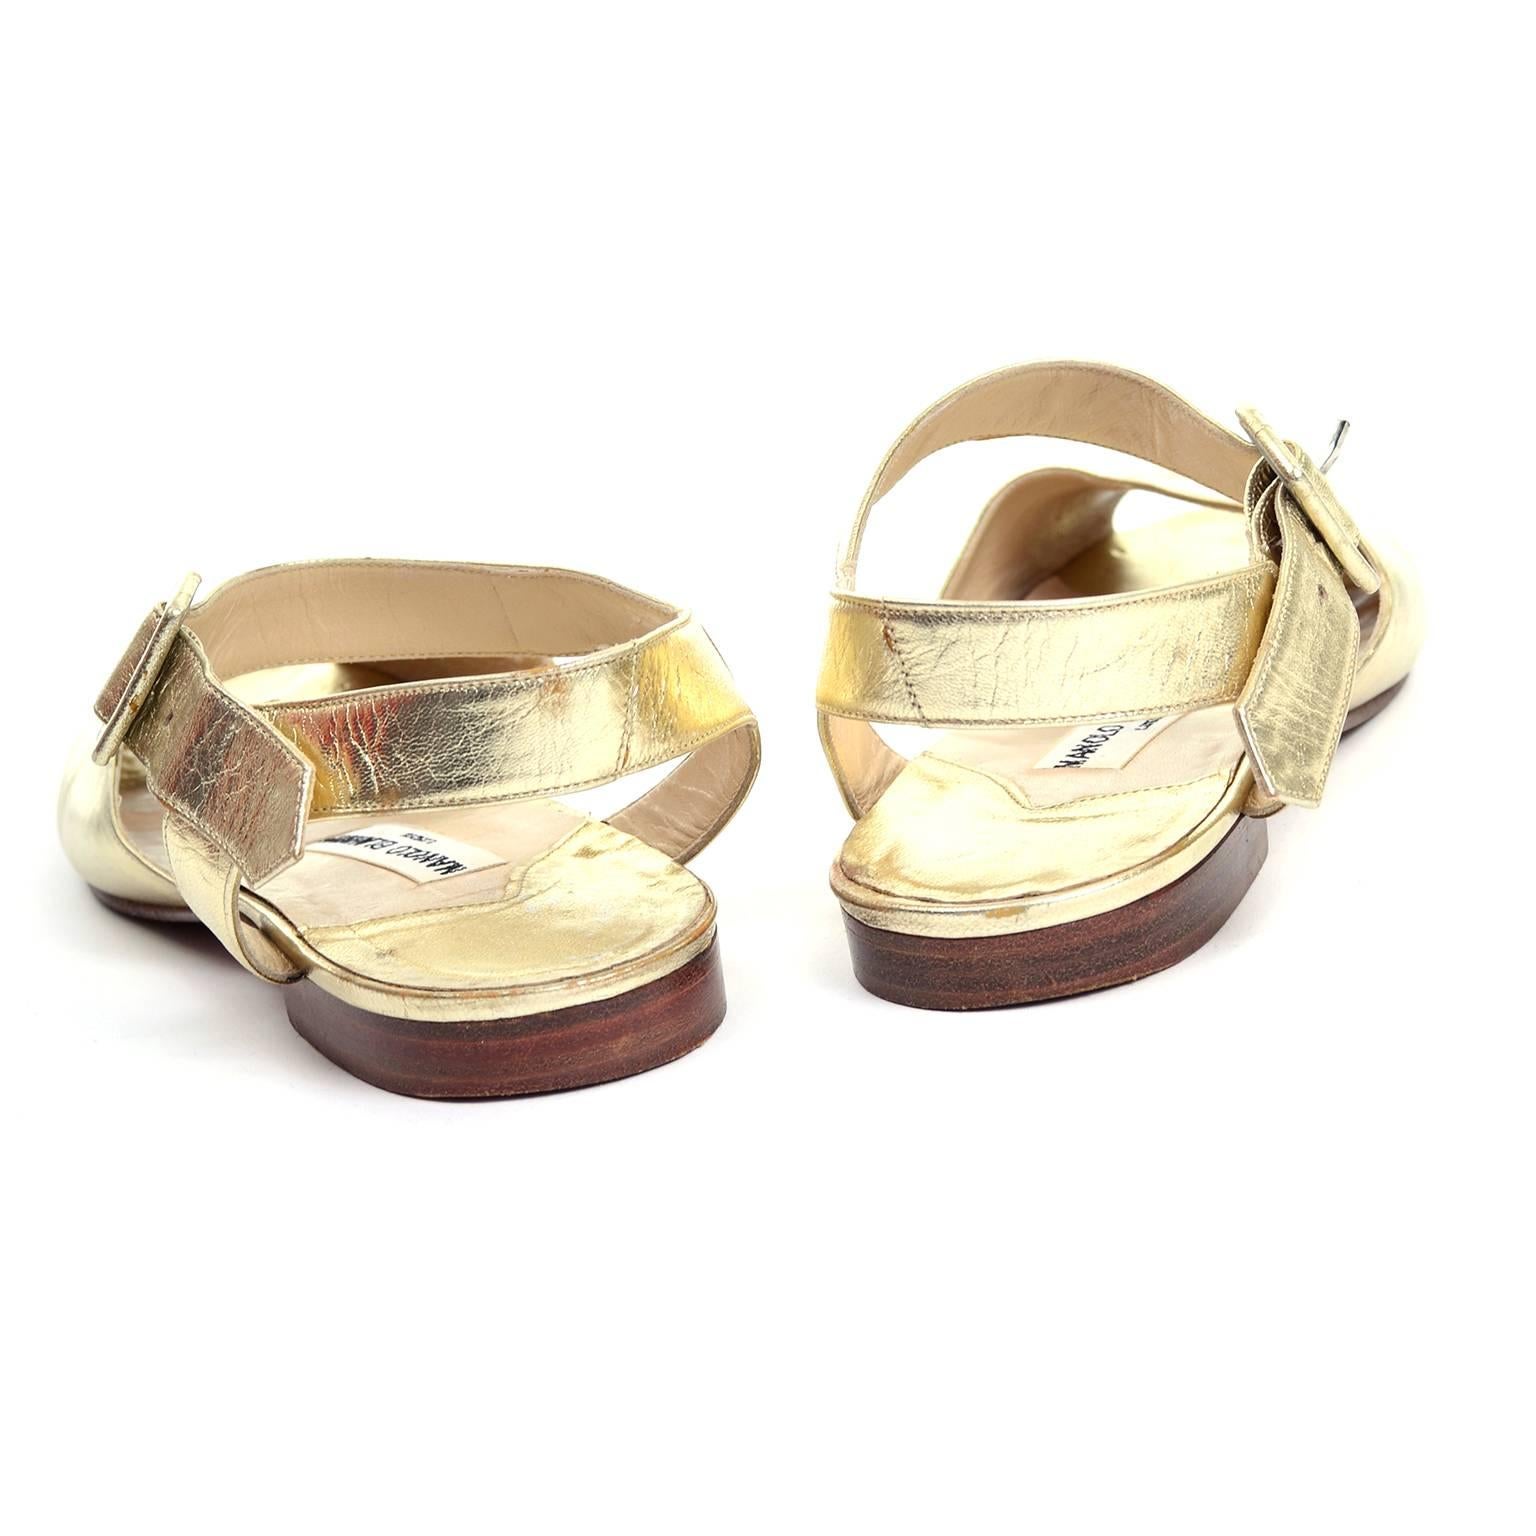 Manolo Blahnik London Shoes Gold Peep Toe Flats Sandals Size 38 In Excellent Condition In Portland, OR